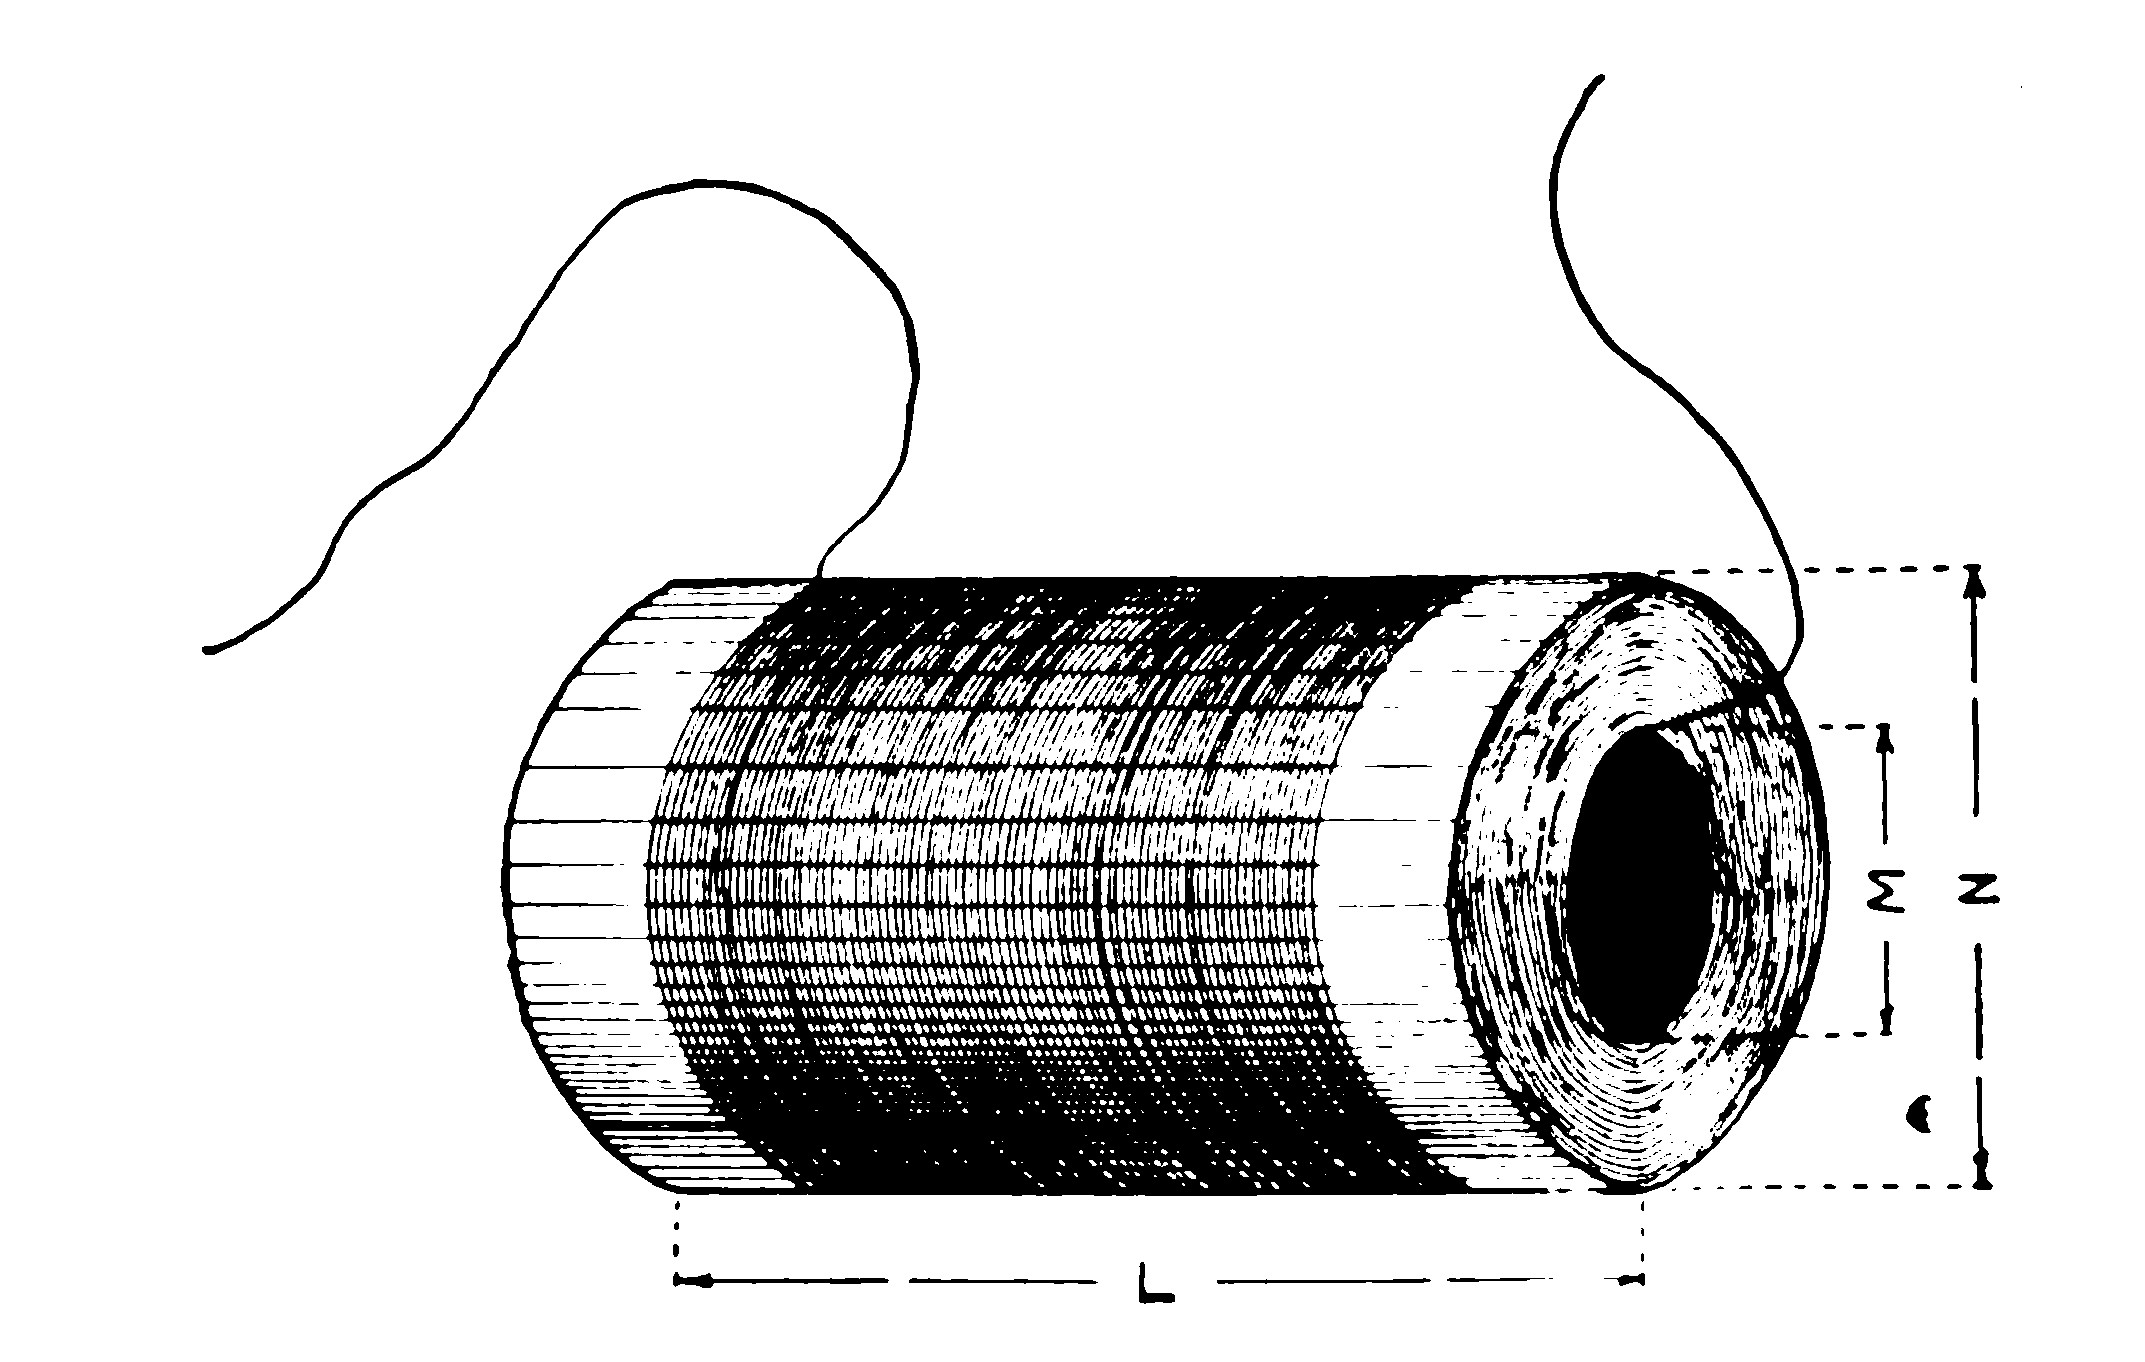 FIG. 111.—The Secondary Winding.